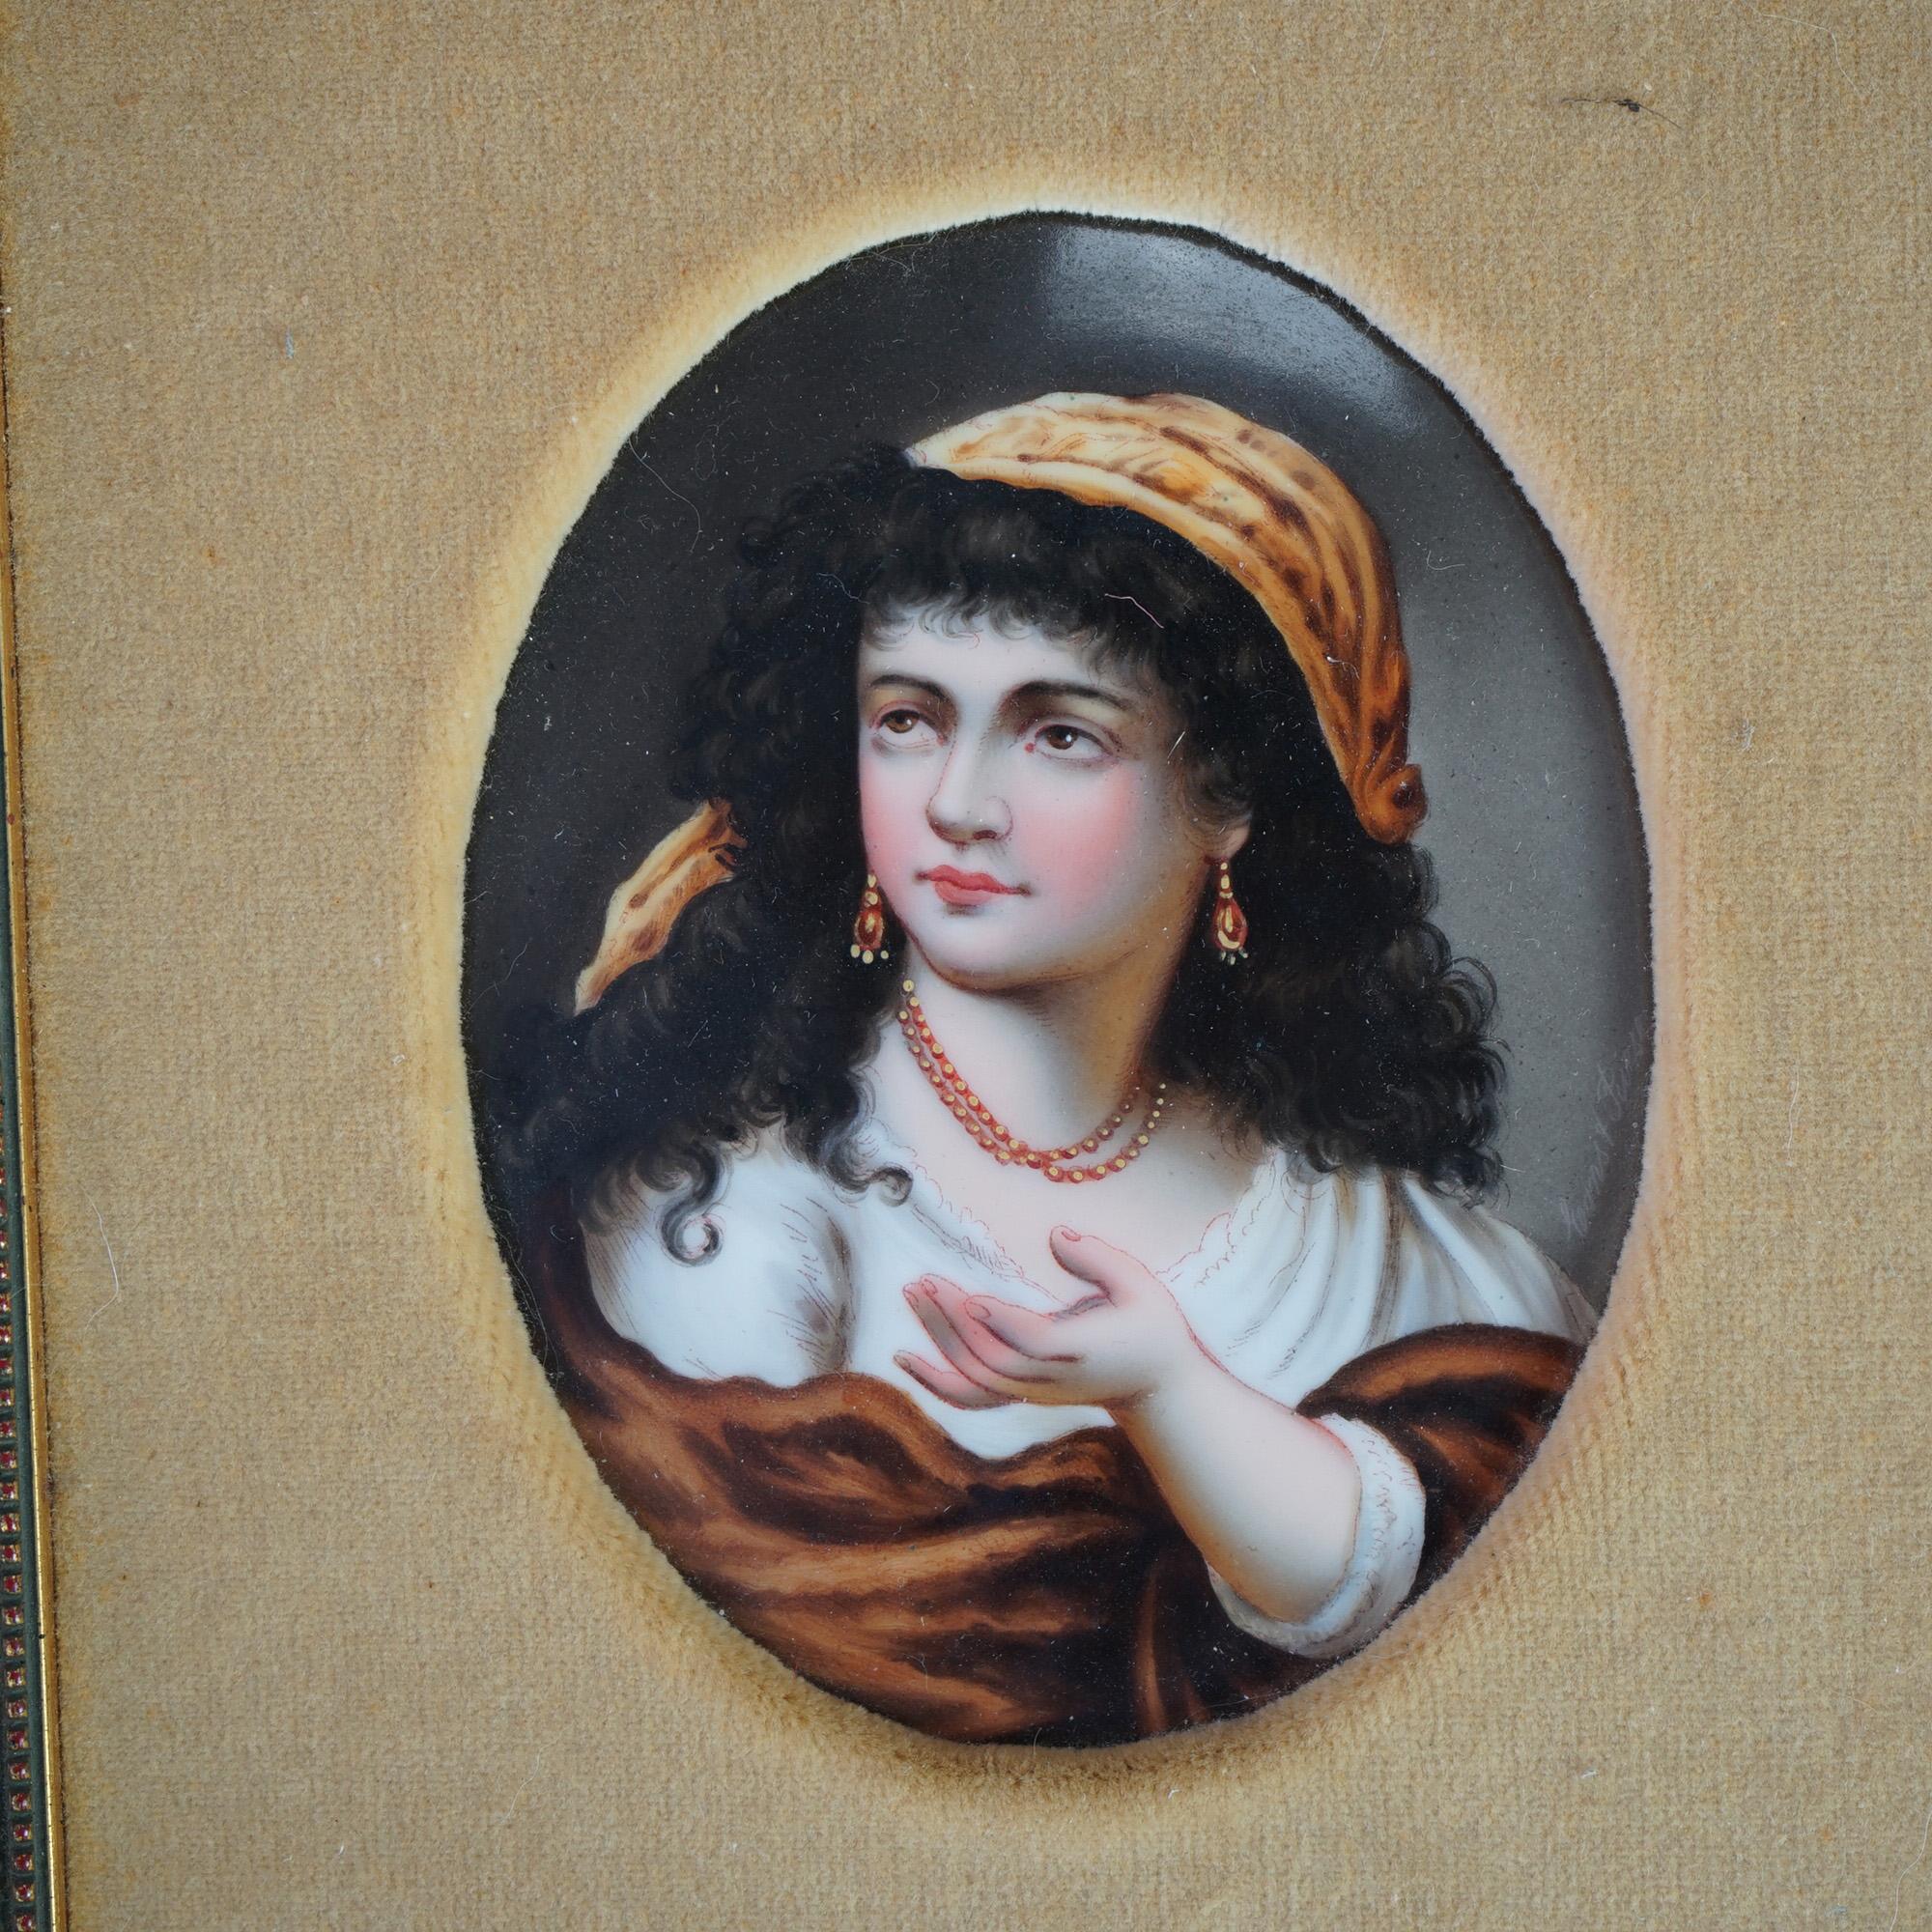 Antique KPM School Portrait Painting on Porcelain of Gypsy Girl Late 19th C For Sale 2